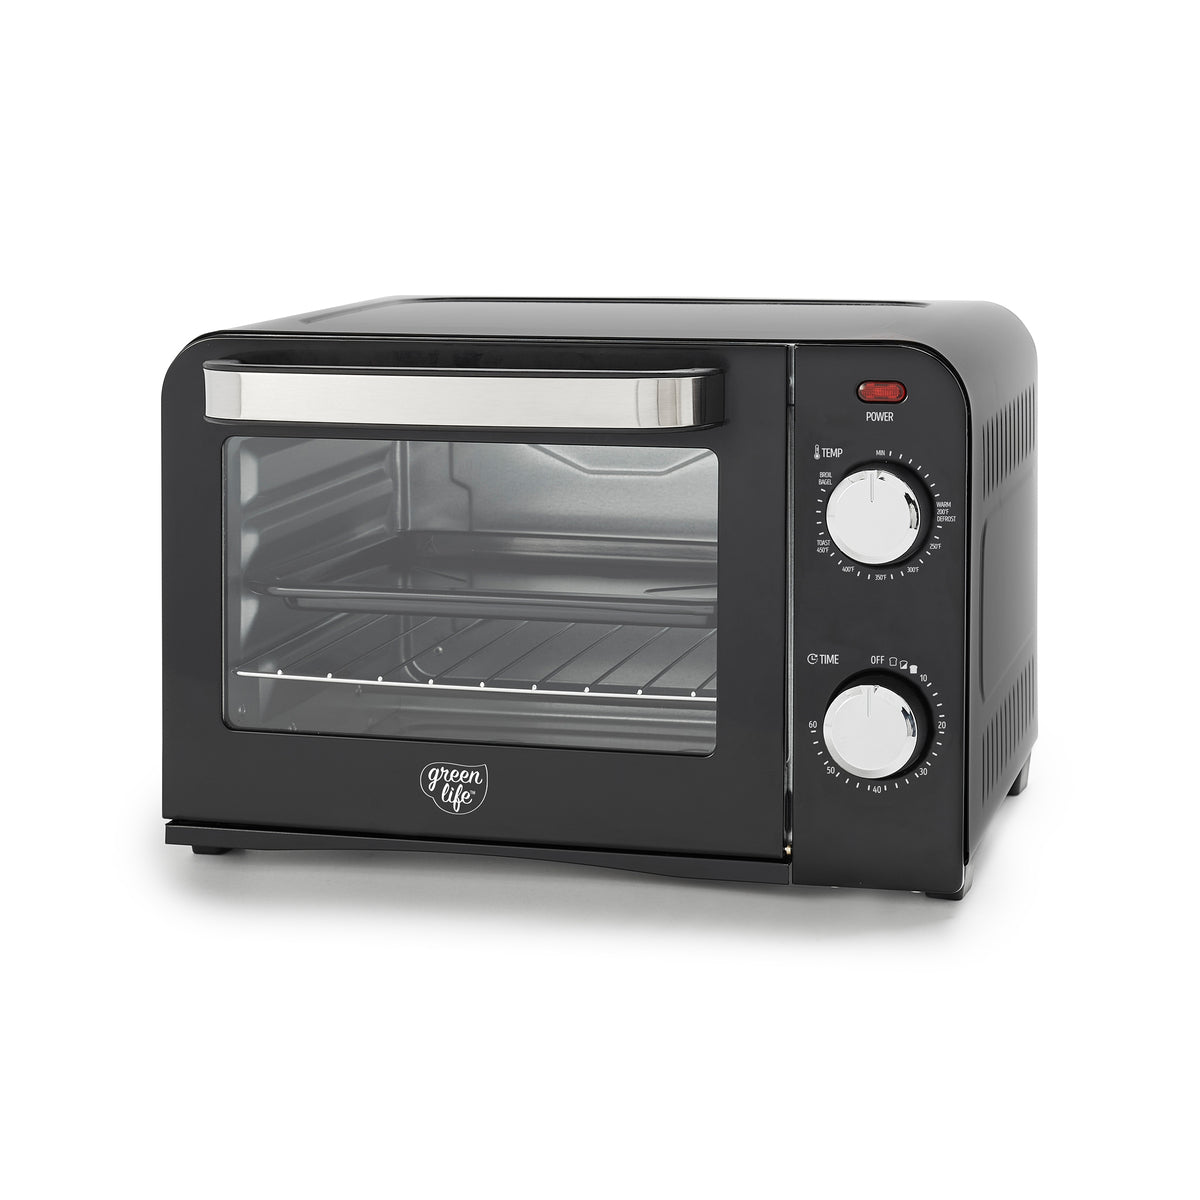 GreenLife All-in-One Oven